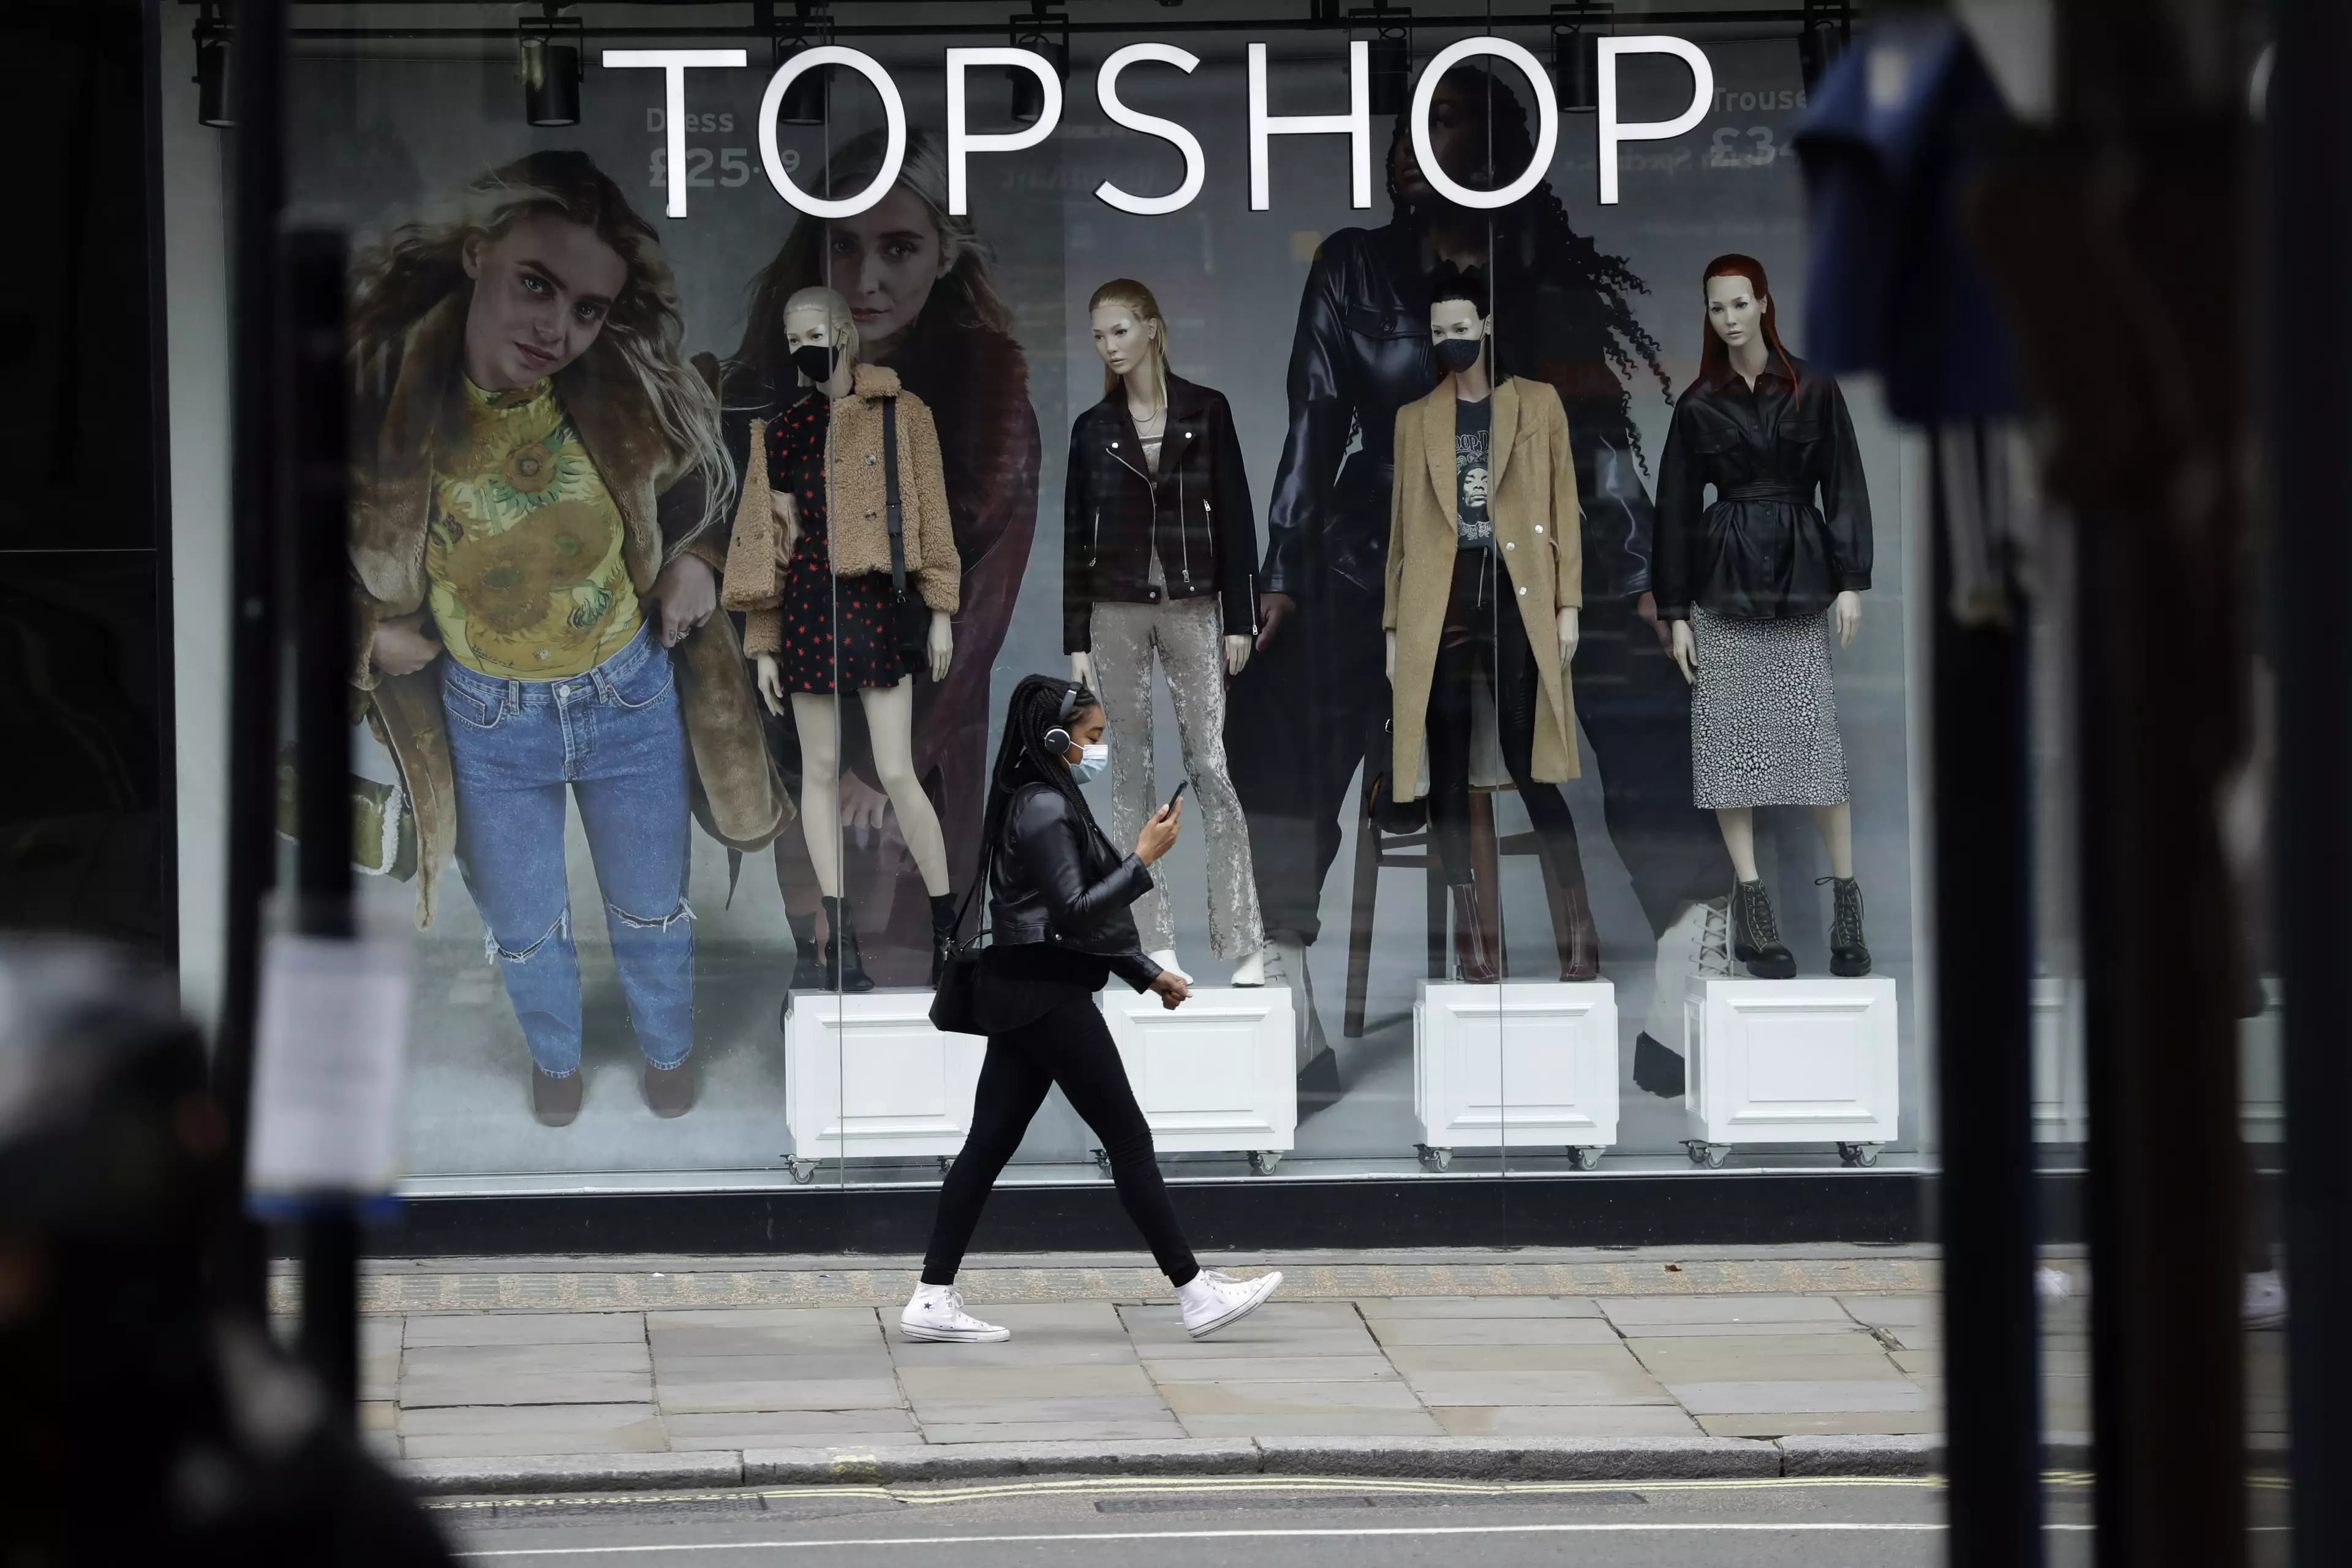 Topshop is just one of the high street brands owned by Arcadia (